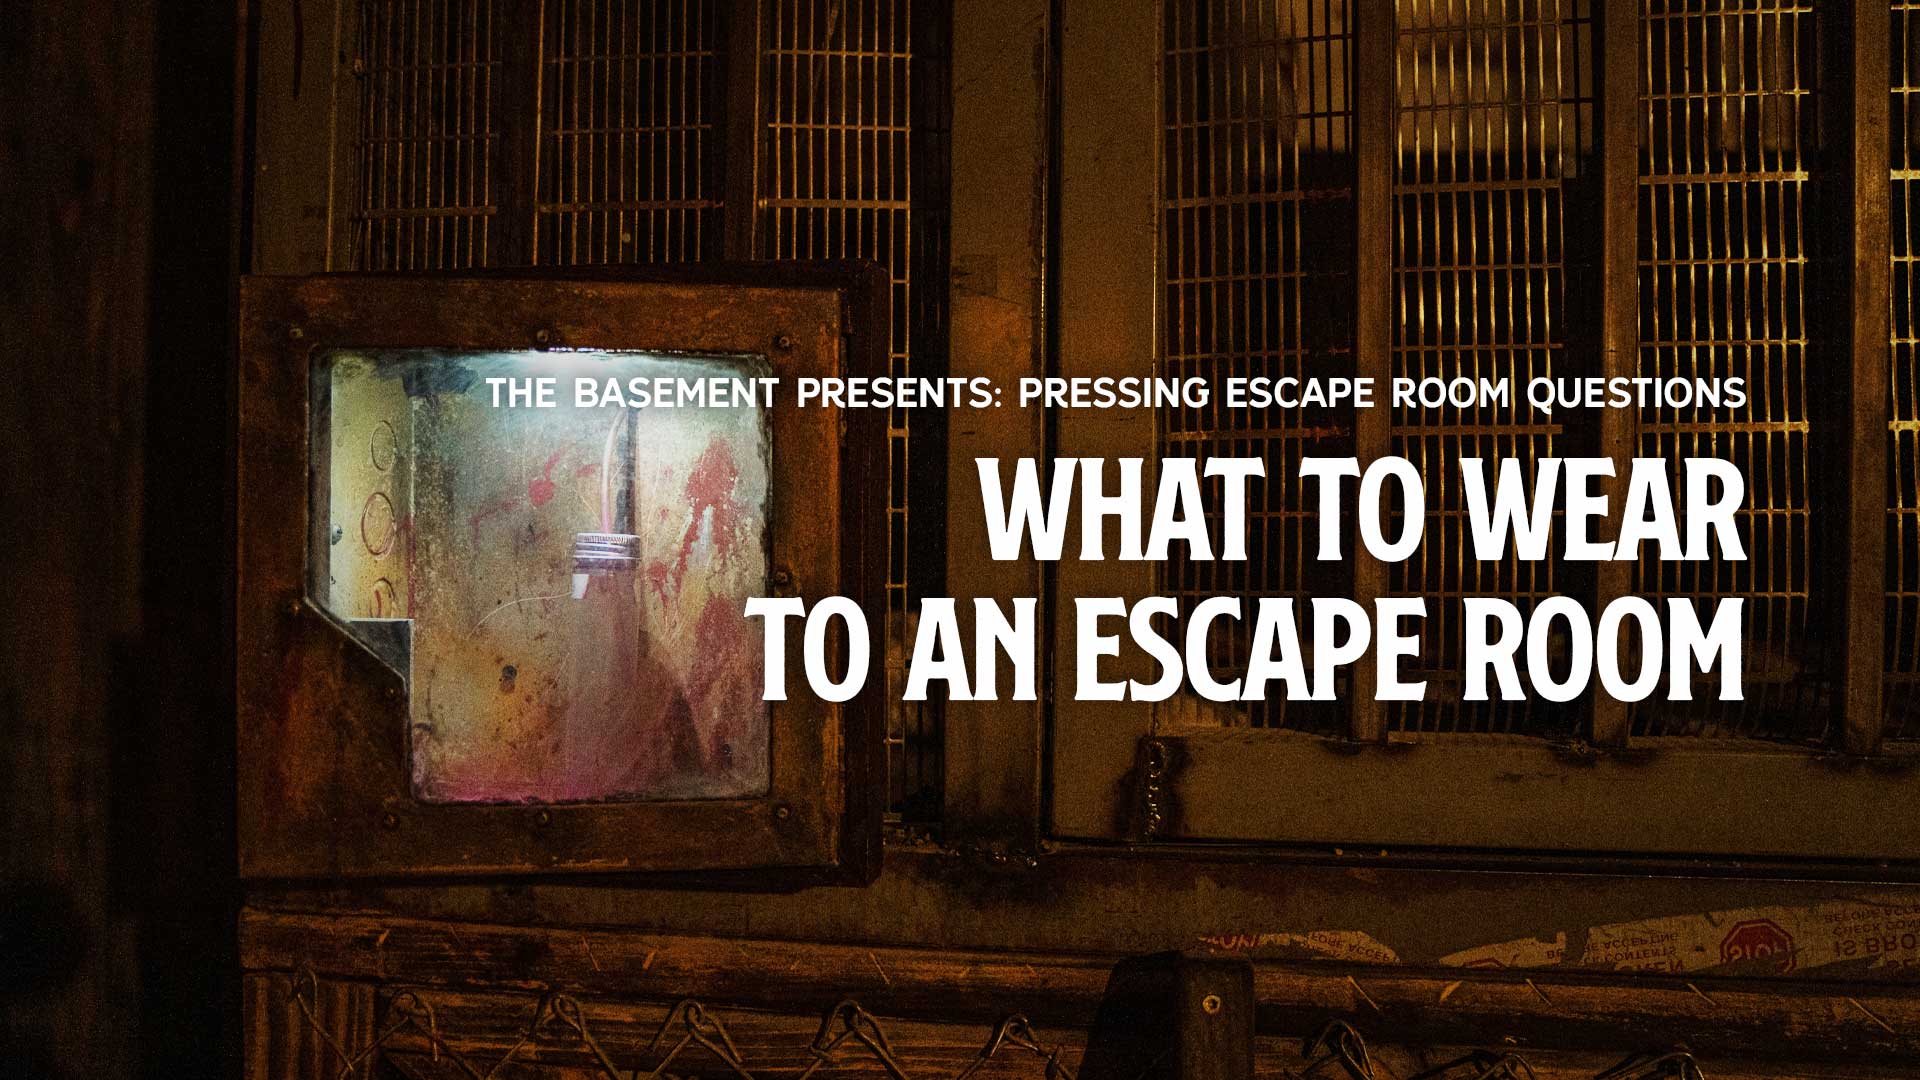 What to wear to an escape room